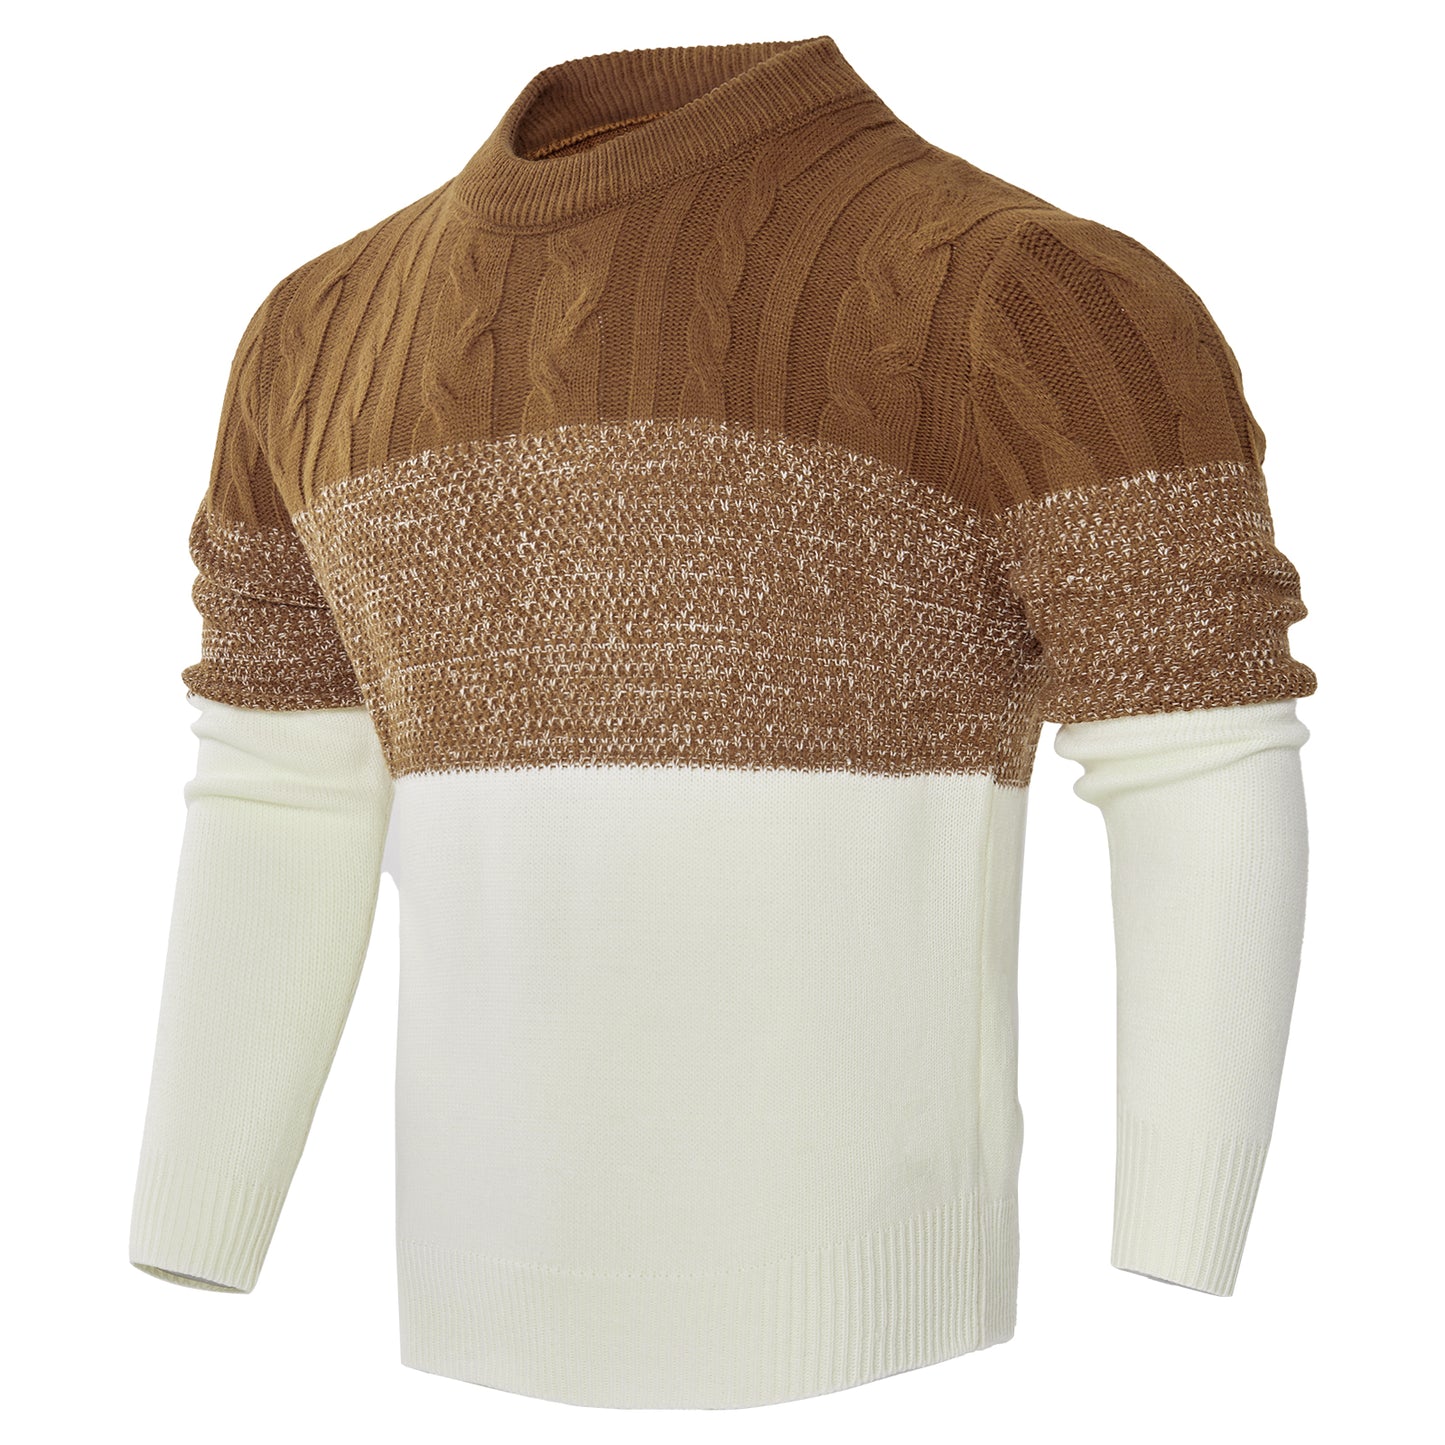 Men's Block Colour Knitted Sweater